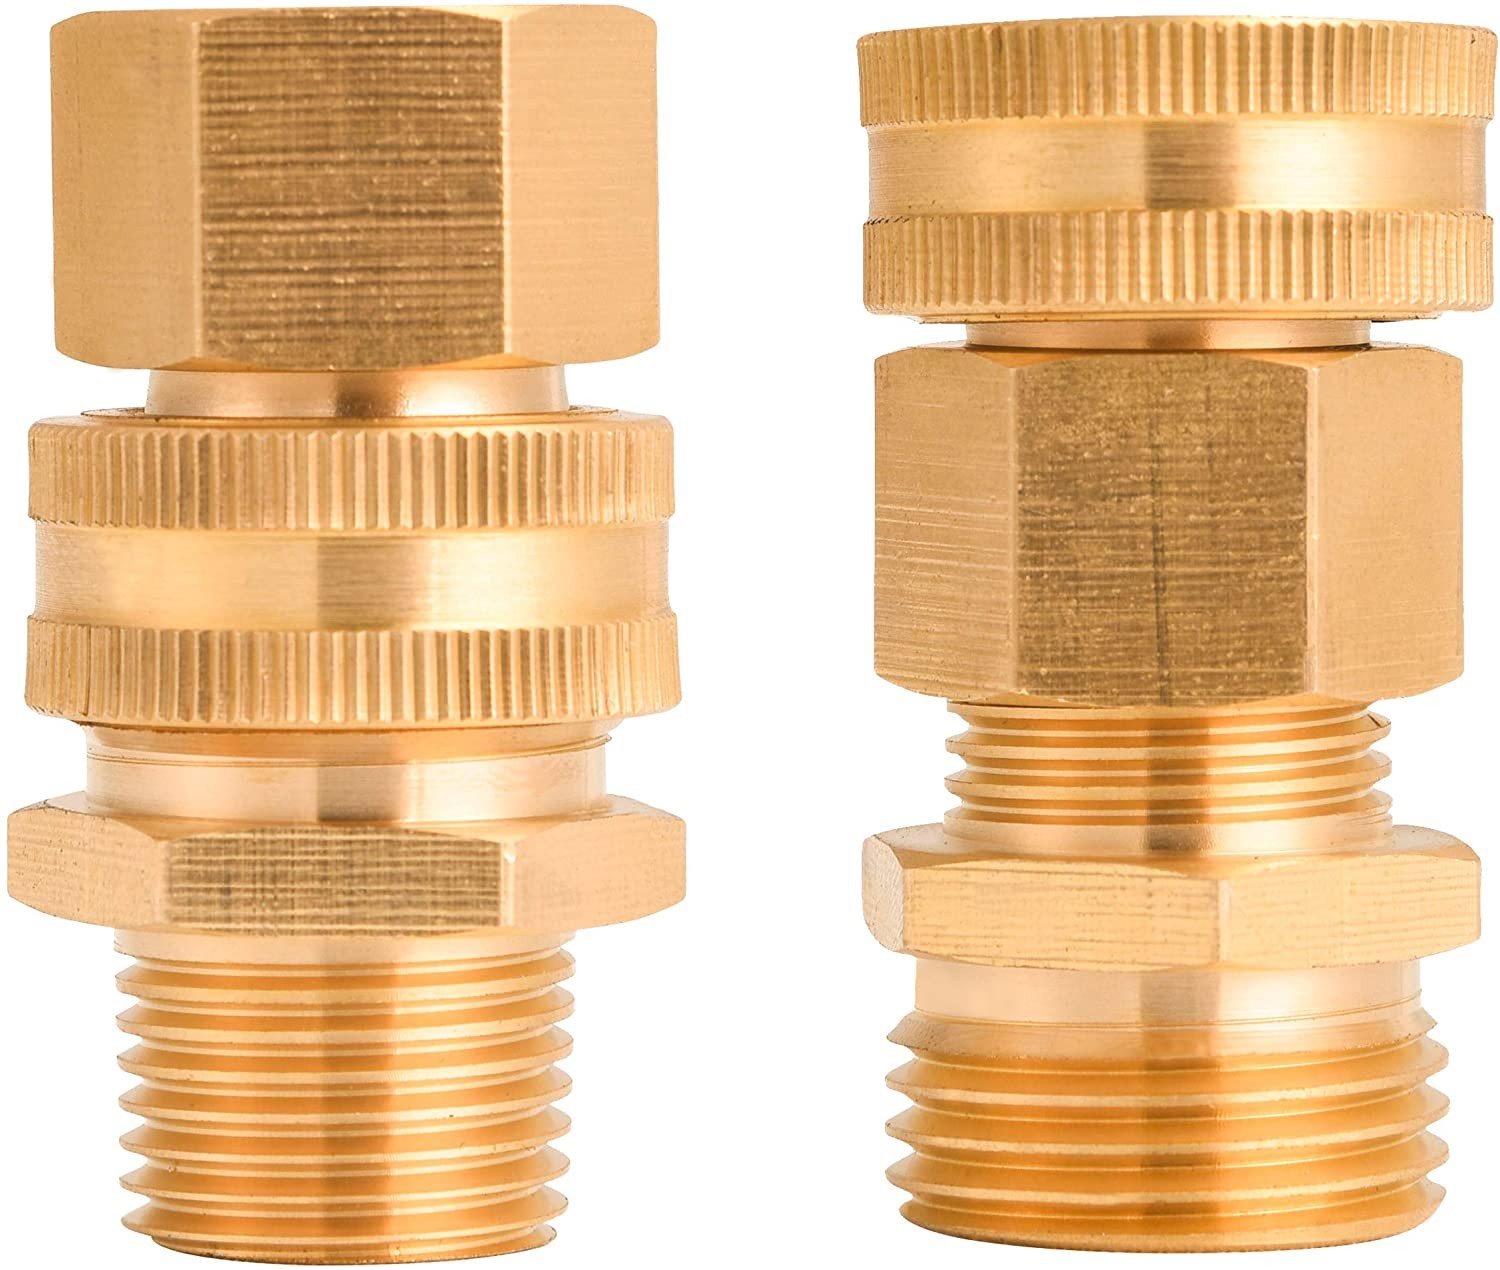  Garden Hose Adapter, 3/4 Inch GHT to 1/2 Inch NPT, Double Male and Female Brass Connector